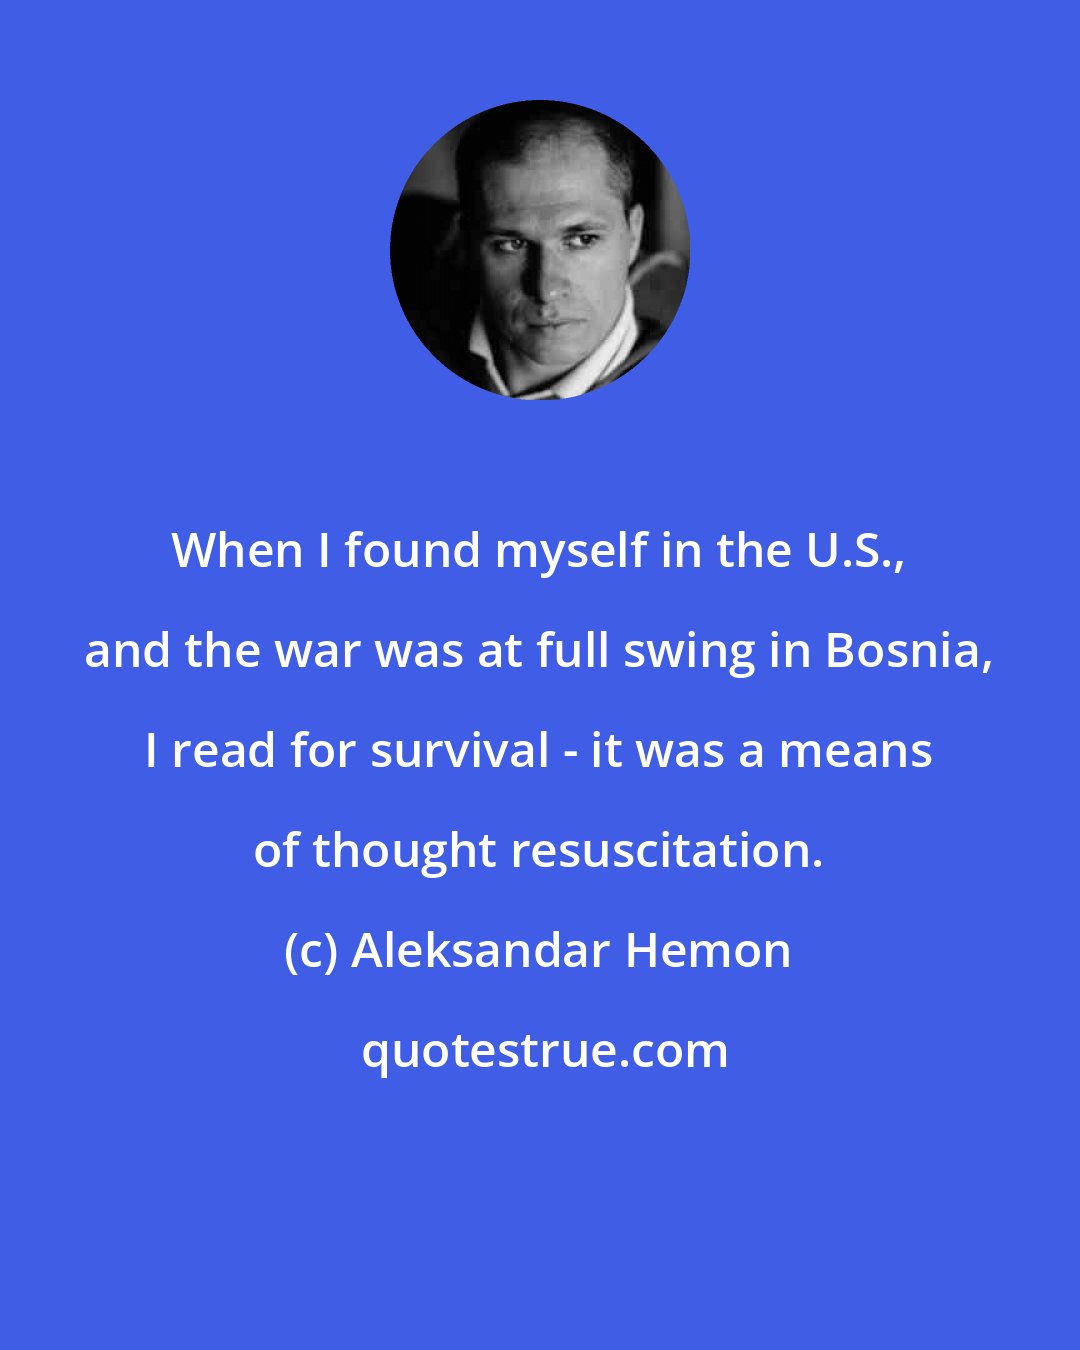 Aleksandar Hemon: When I found myself in the U.S., and the war was at full swing in Bosnia, I read for survival - it was a means of thought resuscitation.